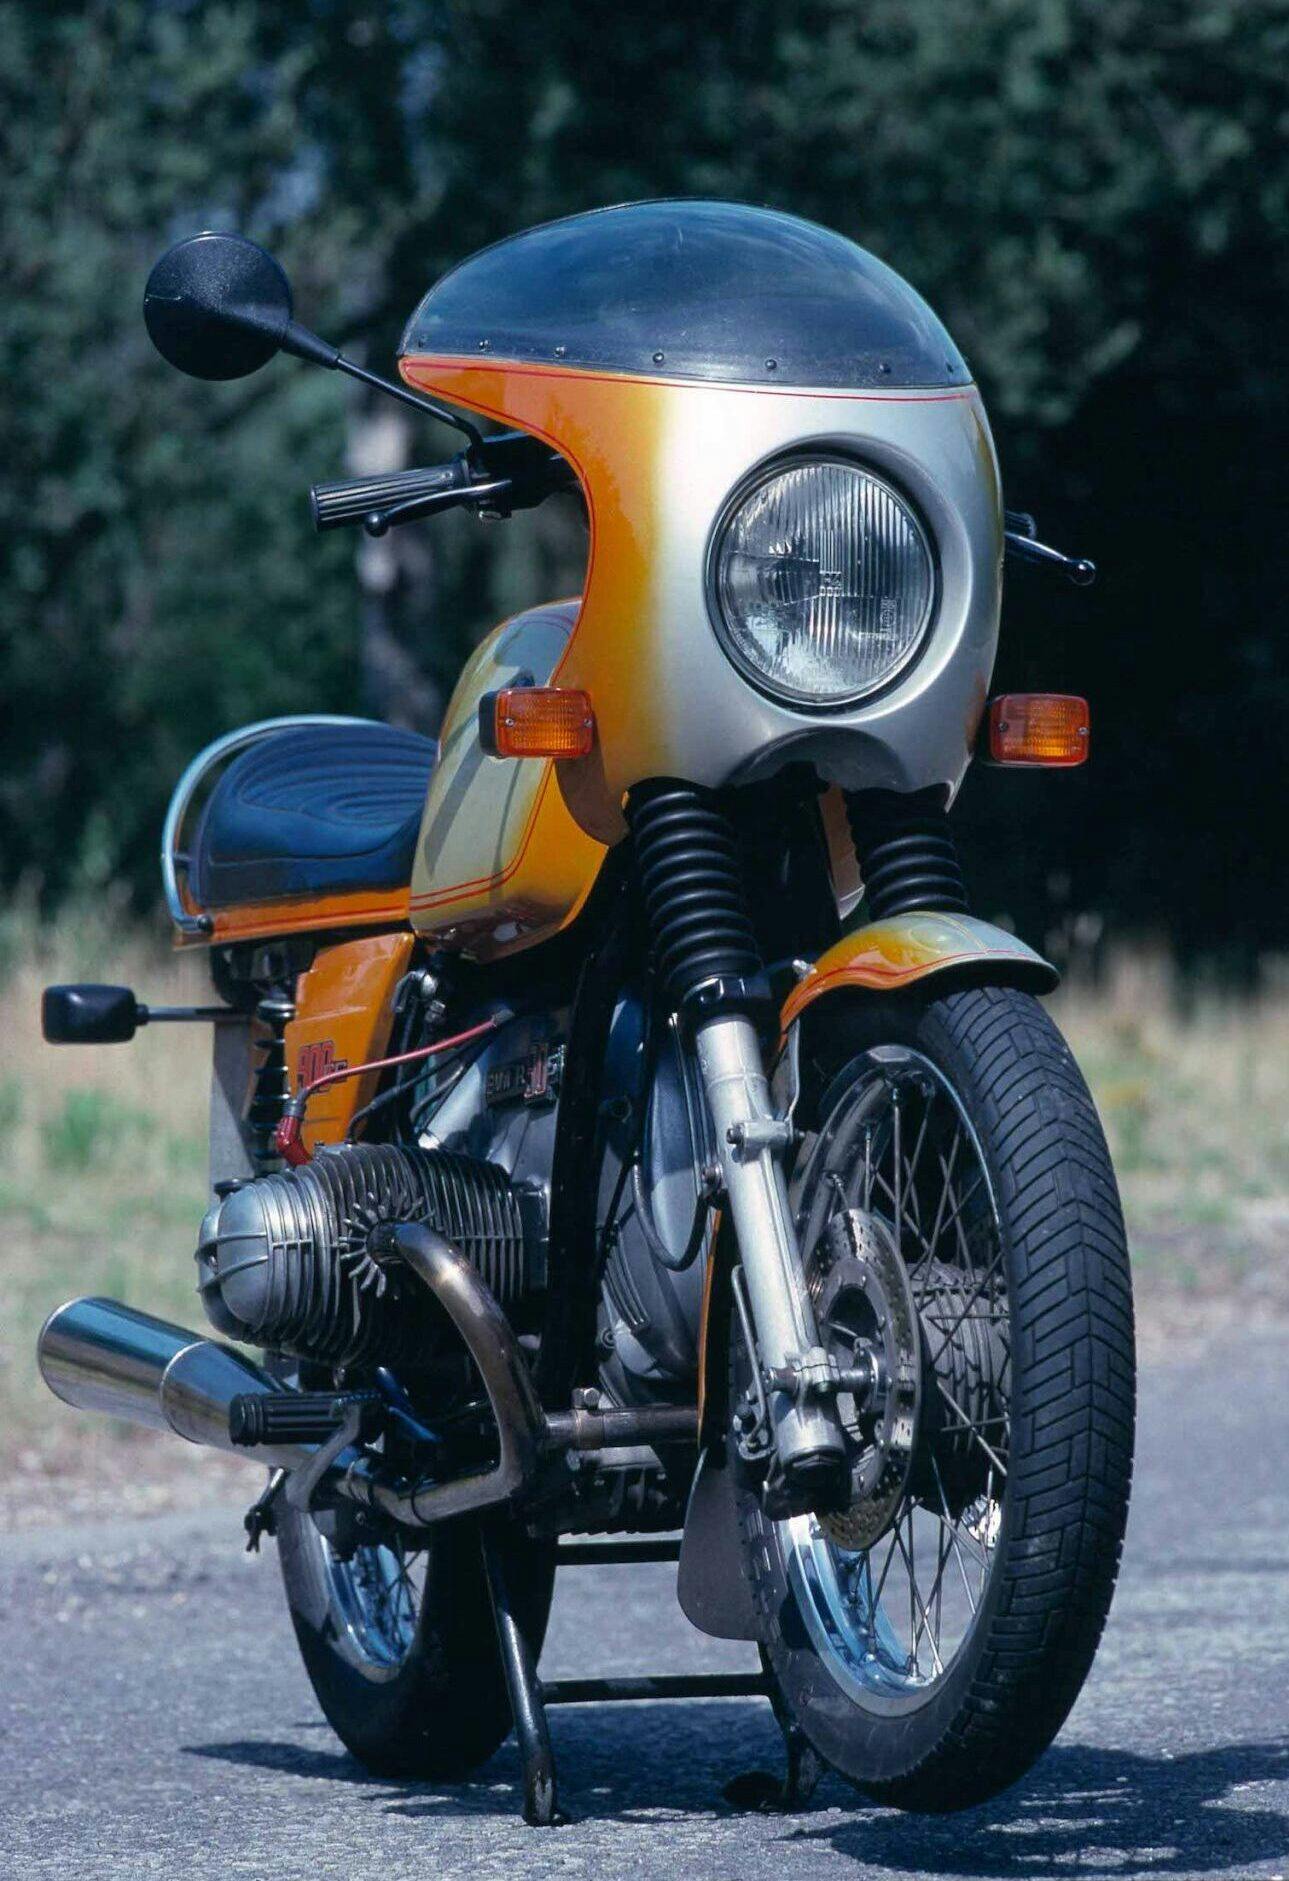 BMW R90S motorcycle front vertical